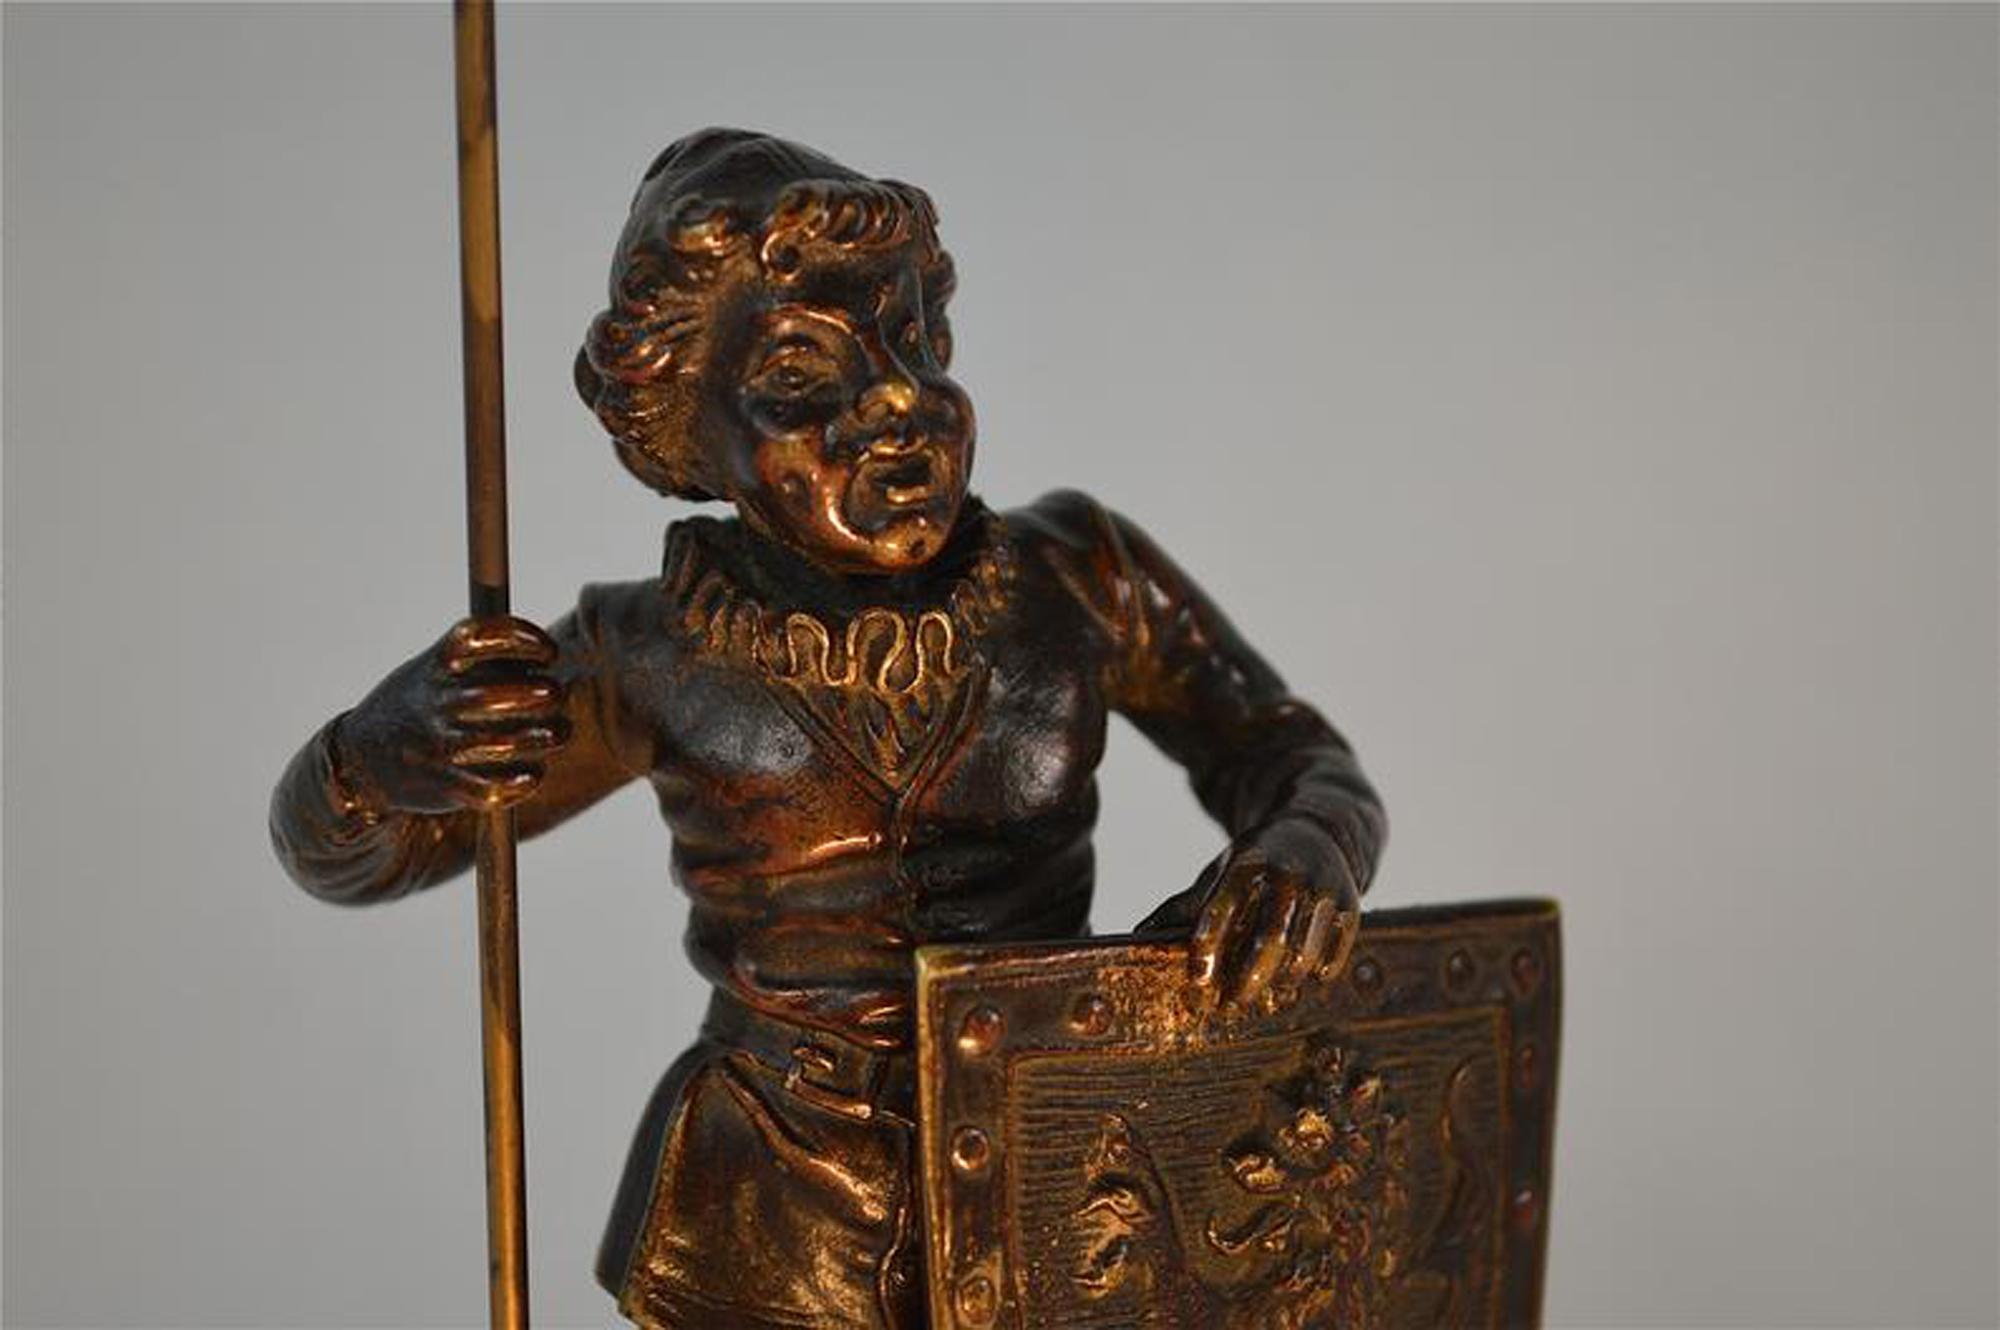 A charming antique figure of a medieval man holding a flag. Cast in solid bronze in Europe and dating from circa.1860. The figure is in good condition with a wonderful rich colour and patina. 19cms tall. 7 1/2 inches tall.